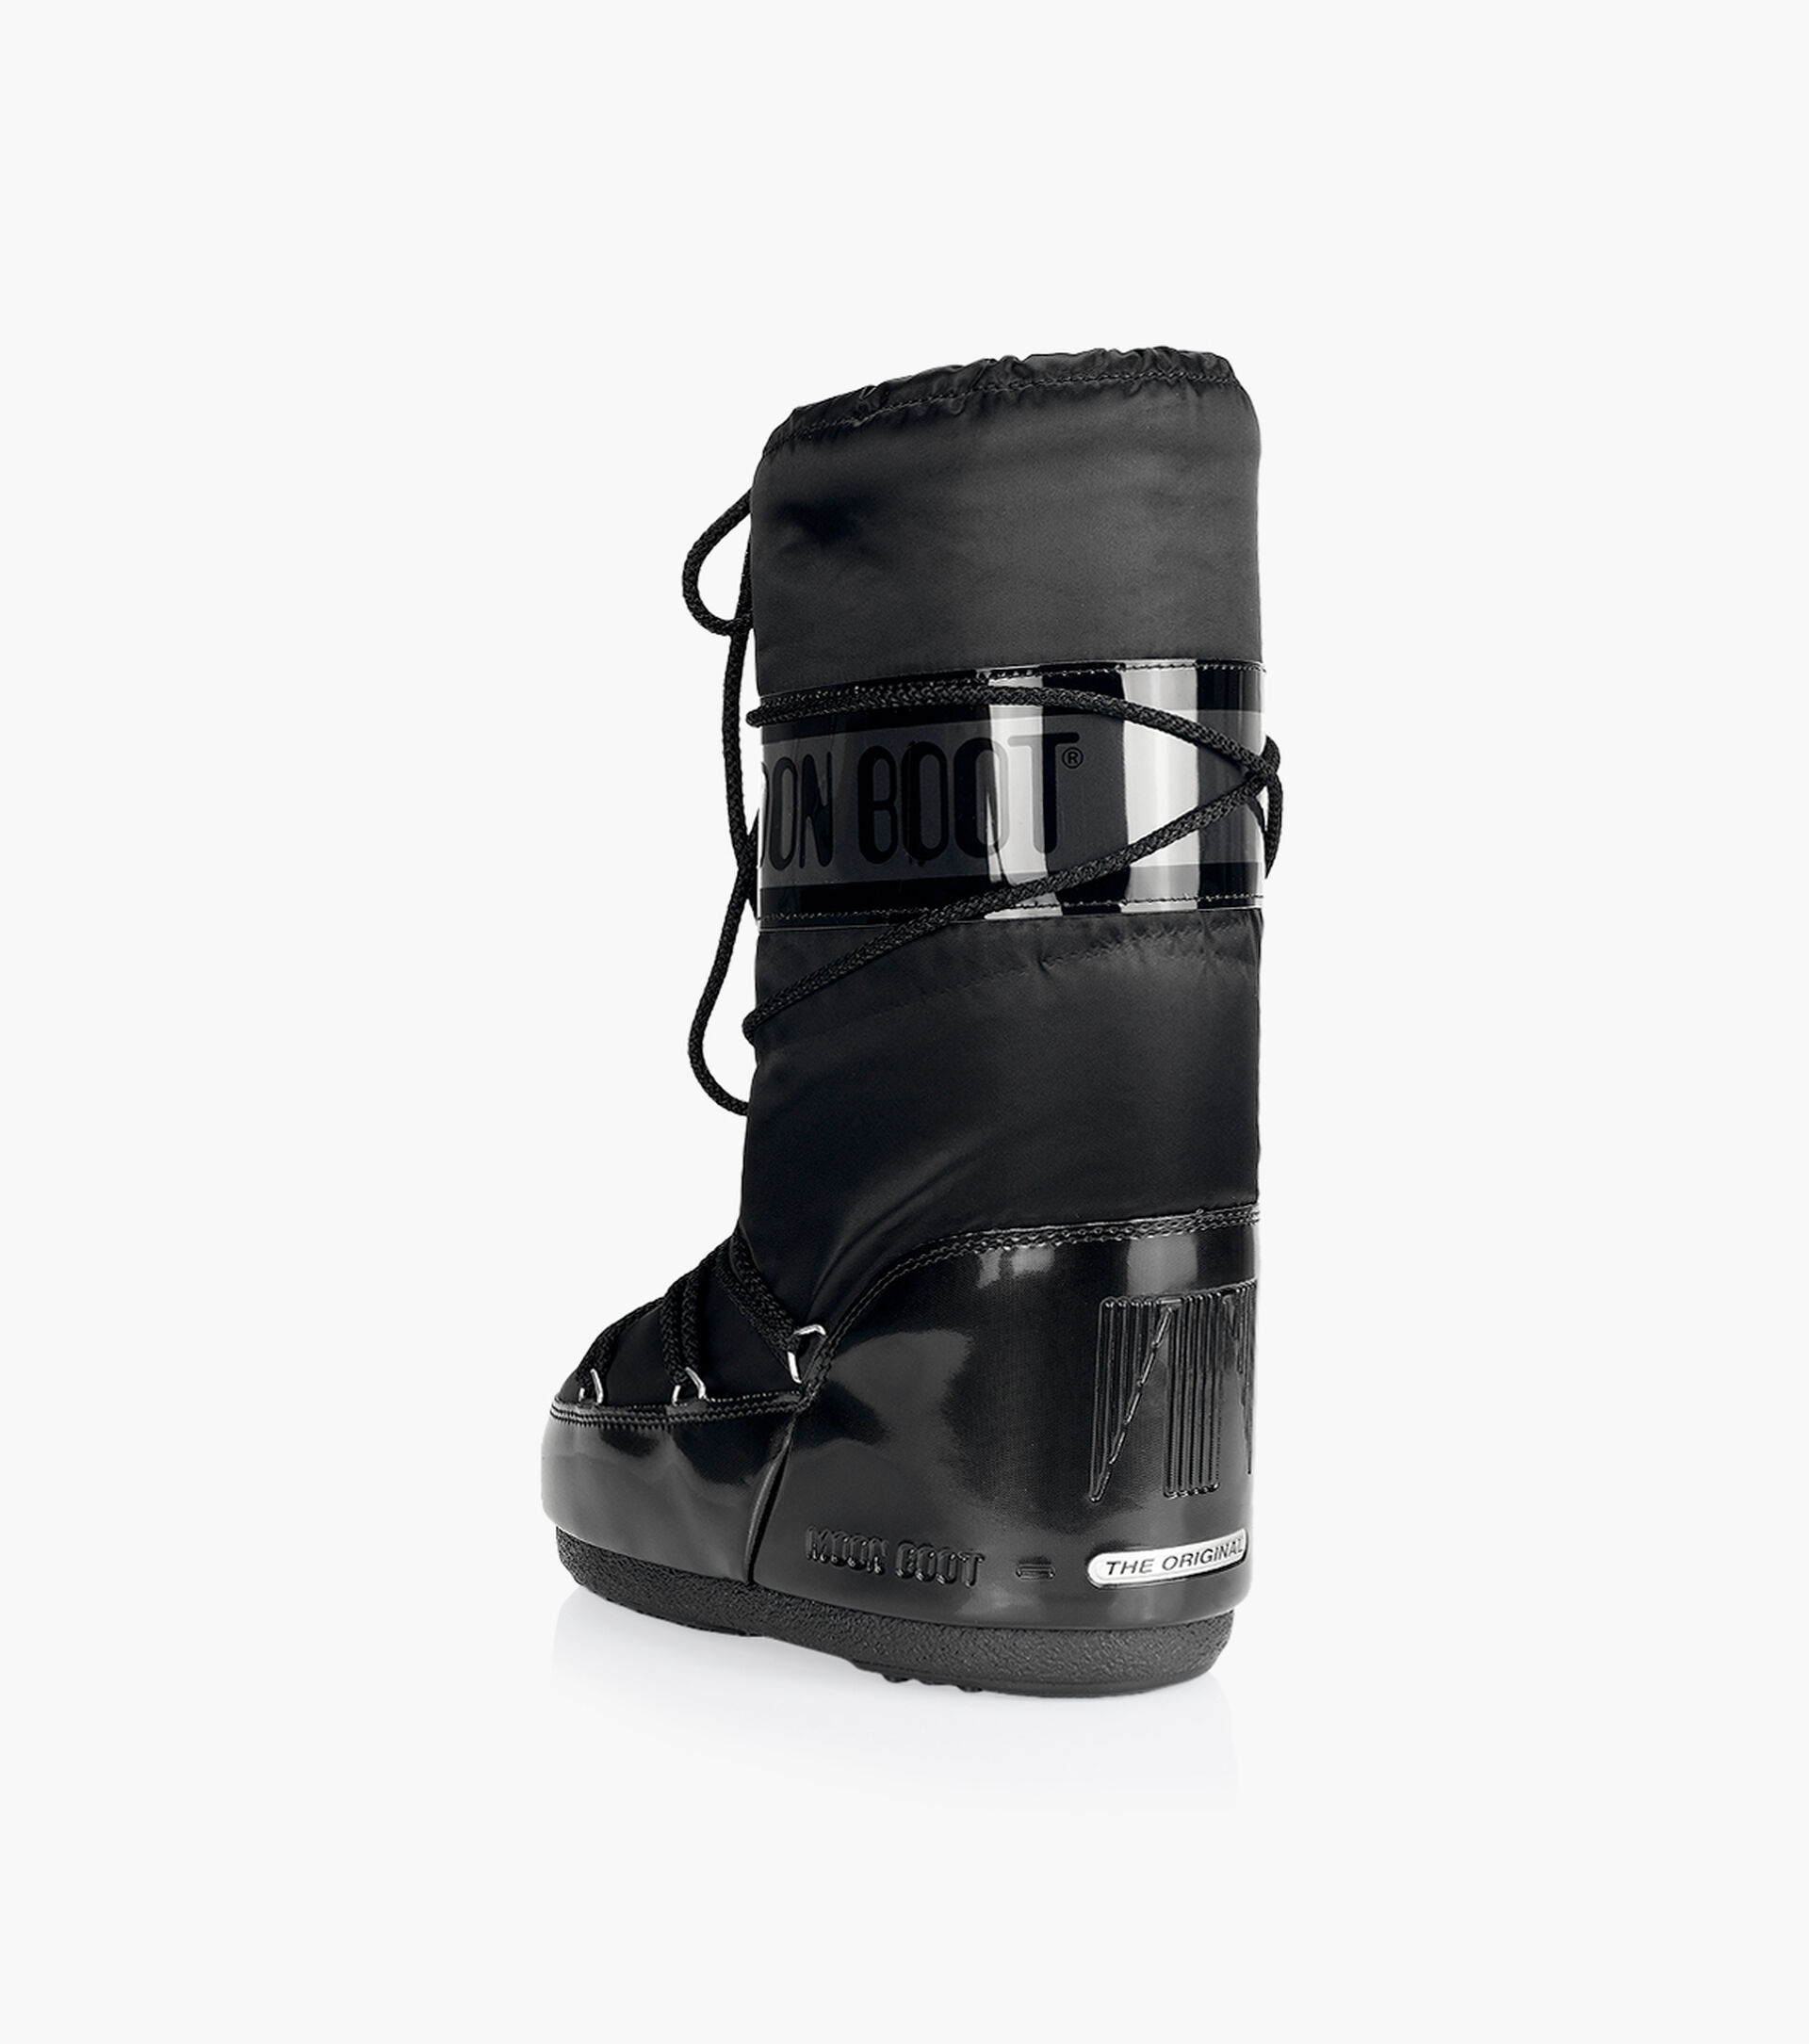 MOON BOOT ICON GLANCE BOOTS - Black Nylon | Browns Shoes